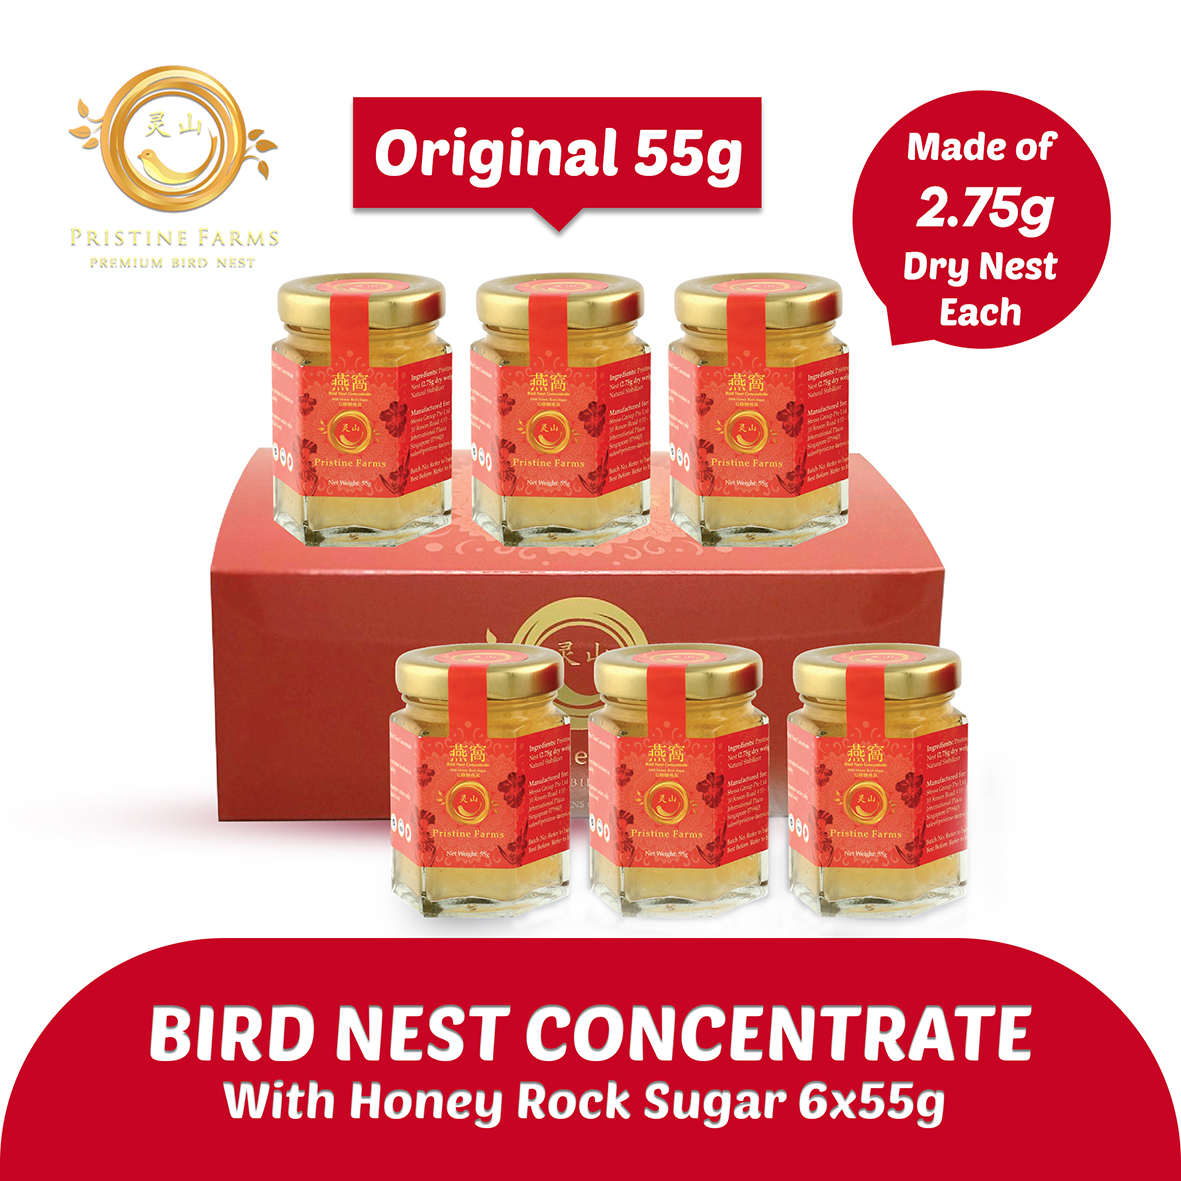 Pristine Farm Bird Nest Concentrate with 2.75g of Dry Nest - Bundle of 6 x 55ml